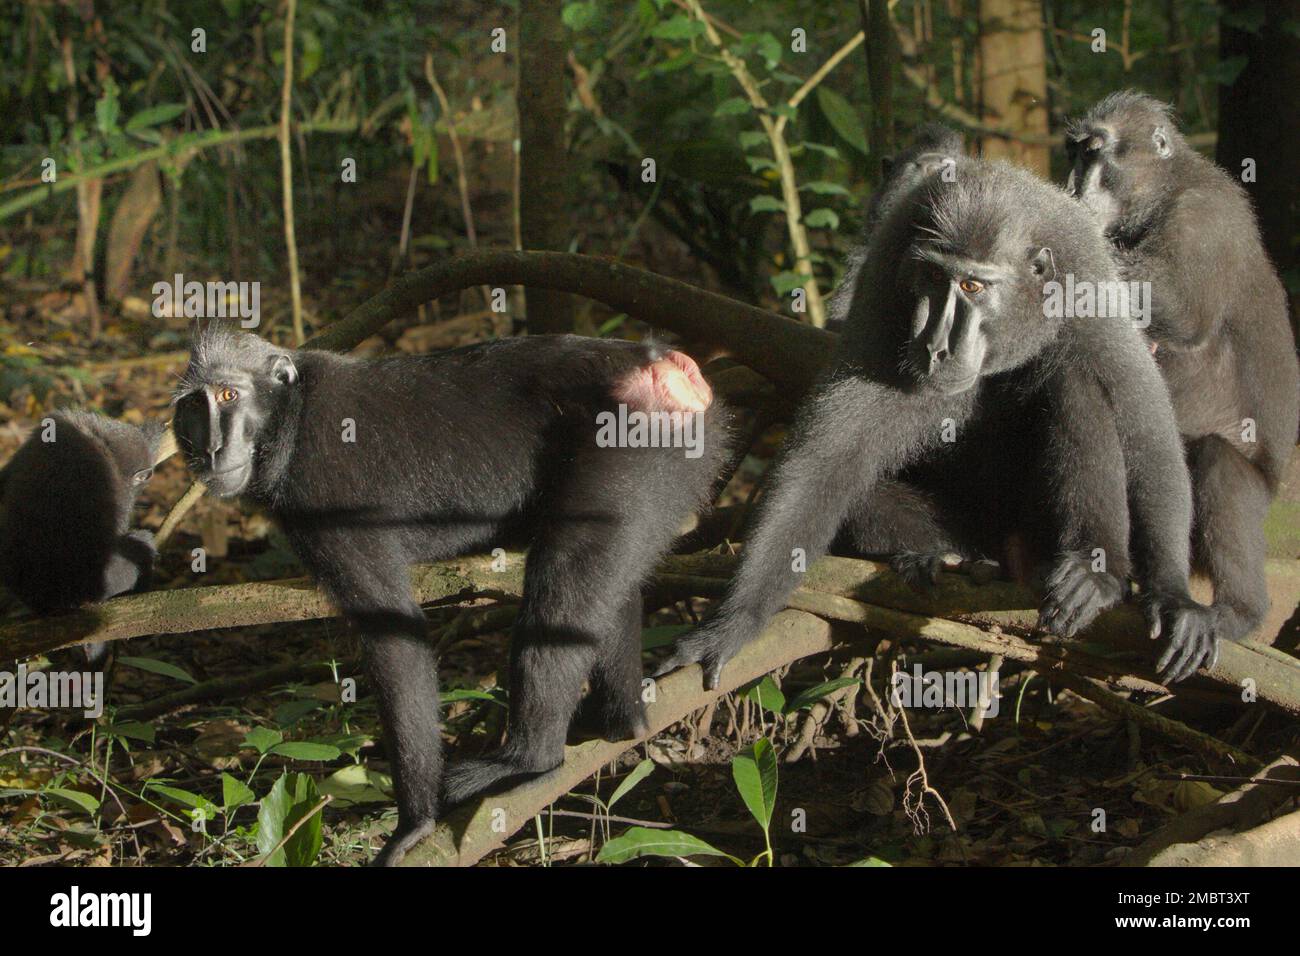 A group of Sulawesi black-crested macaque (Macaca nigra) in Tangkoko forest, North Sulawesi, Indonesia. A male individual of this species has a 'sociability' personality factor, which is identified by its 'high rate of grooming, high number of female neighbors, and diverse grooming network,' according to a team of scientists led by Christof Neumann in a scientific paper published in August 2013. Males also have 'connectedness' personality factor, which is identified by its 'diverse neighbor and grooming network, spatial position in the core of the group,' they added. Stock Photo